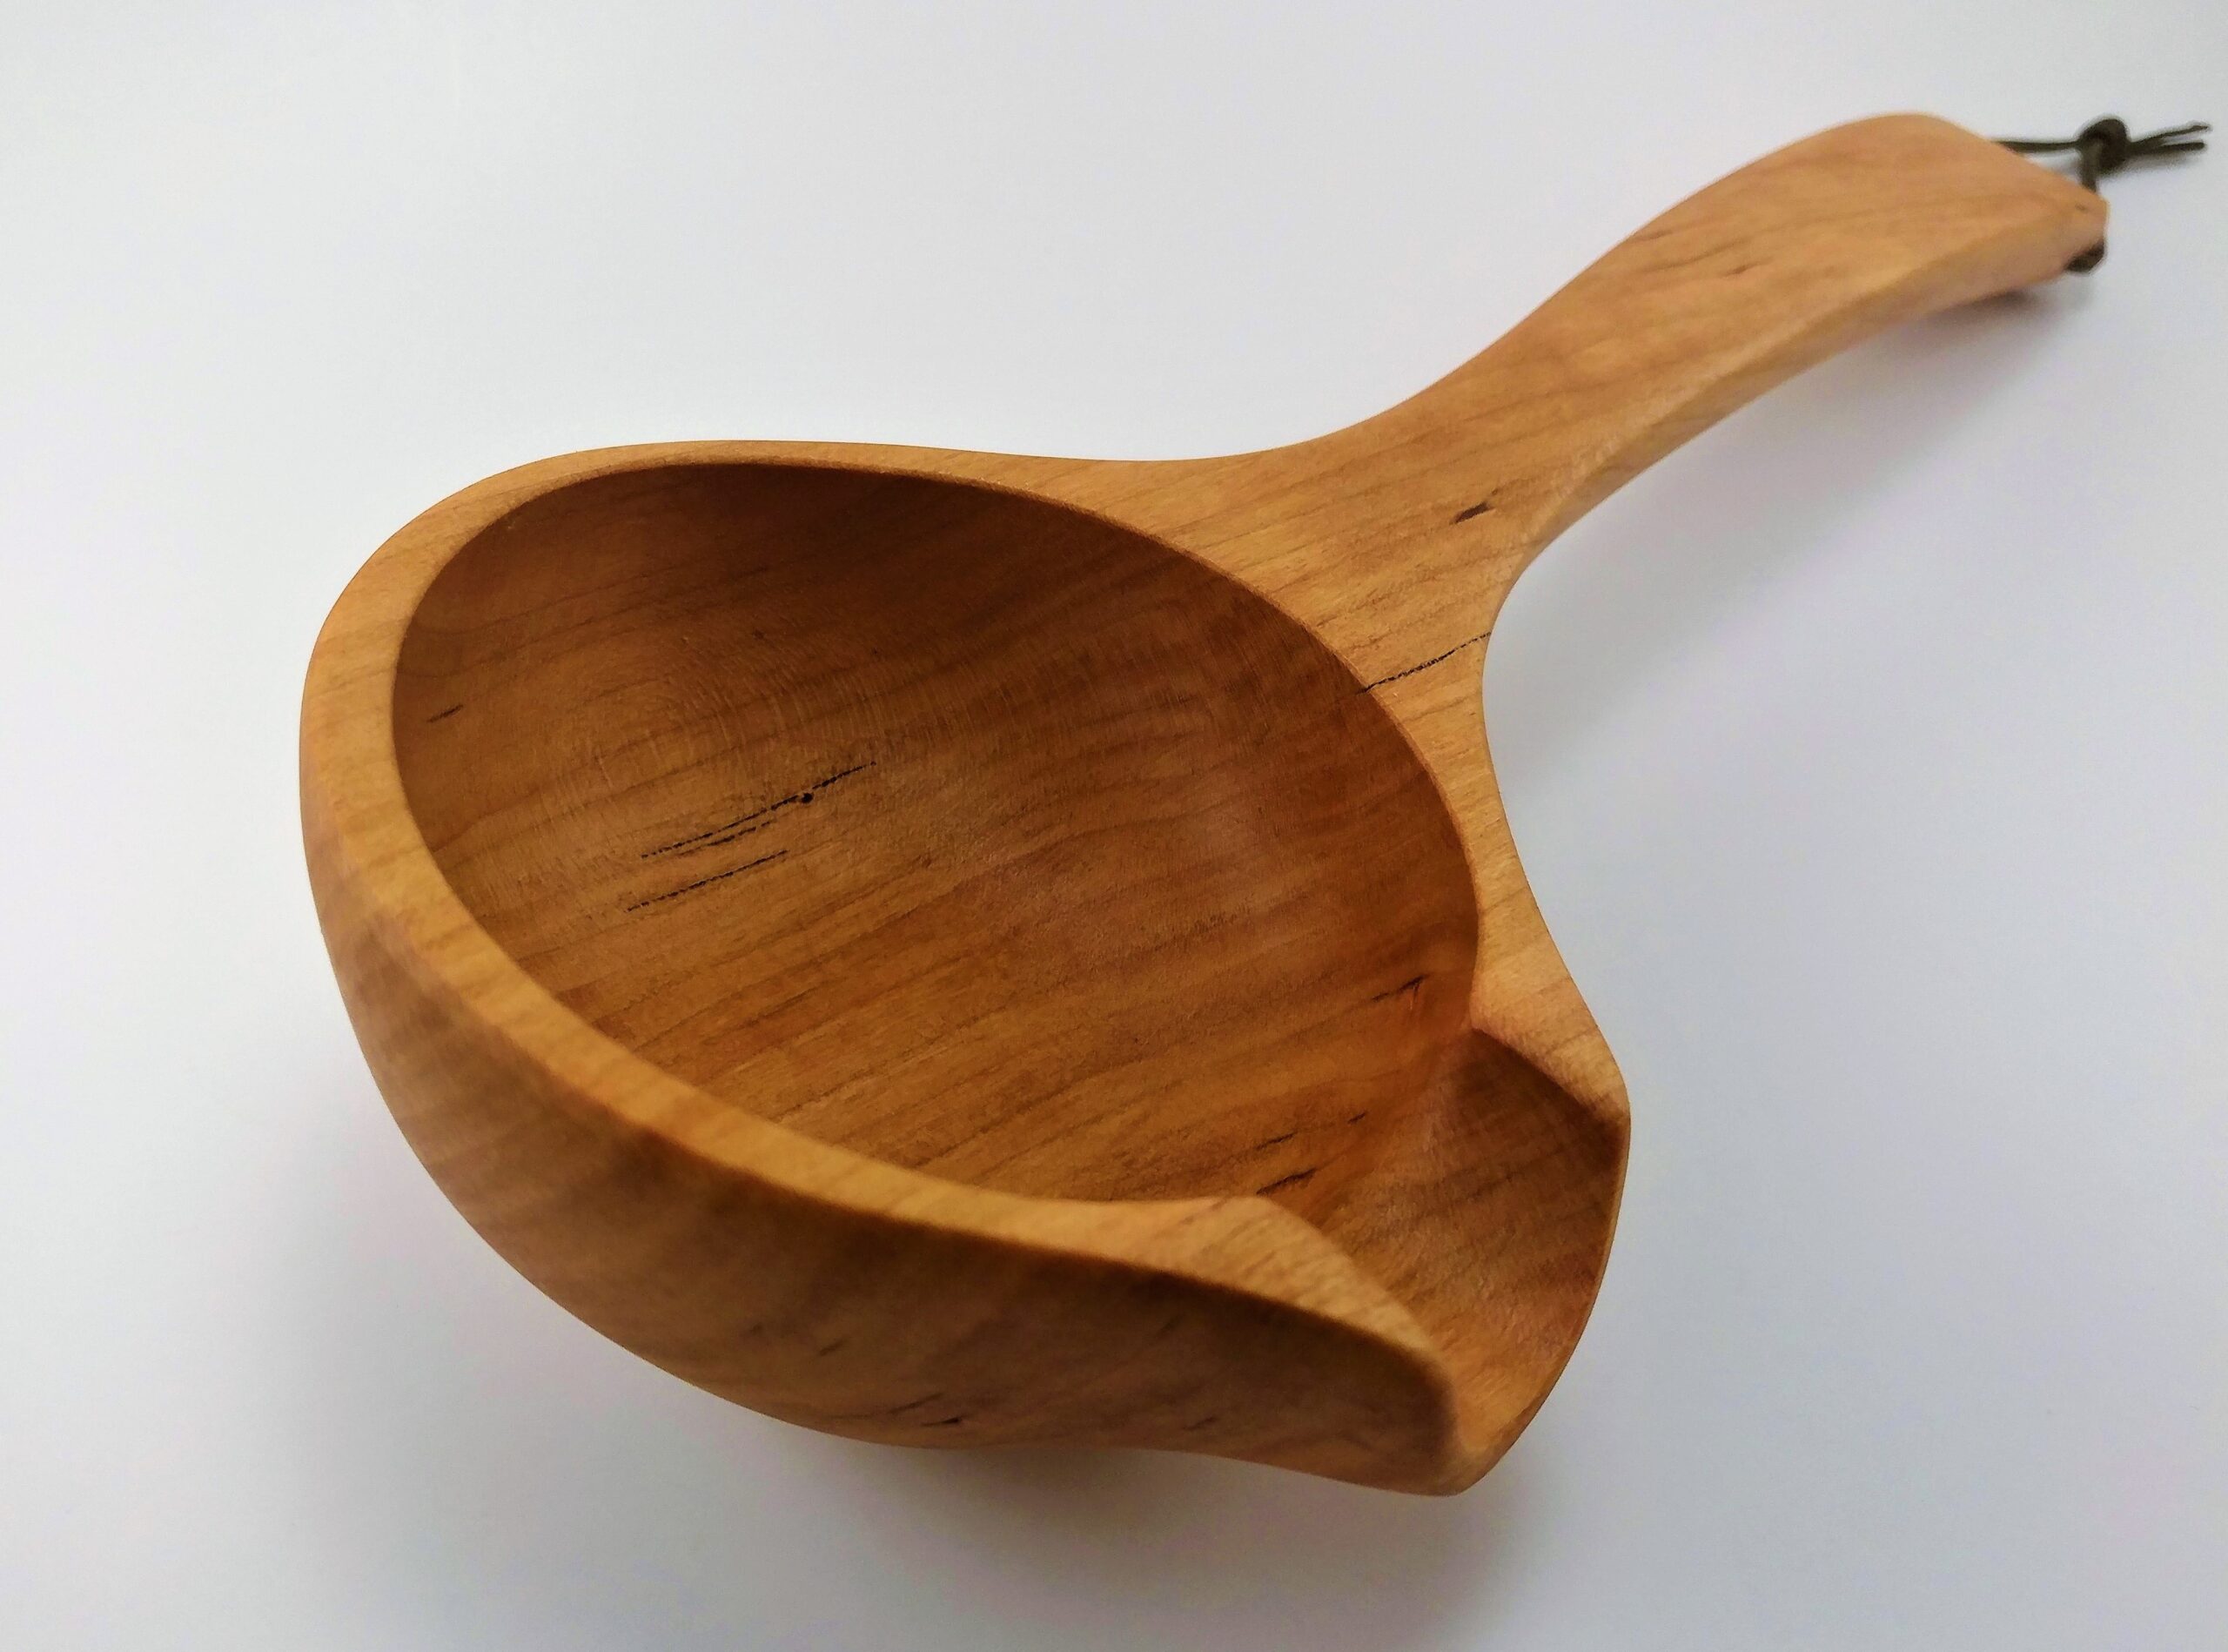 https://alleghenytreenware.com/wp-content/uploads/12-Spouted-Serving-Spoon-2-scaled.jpg